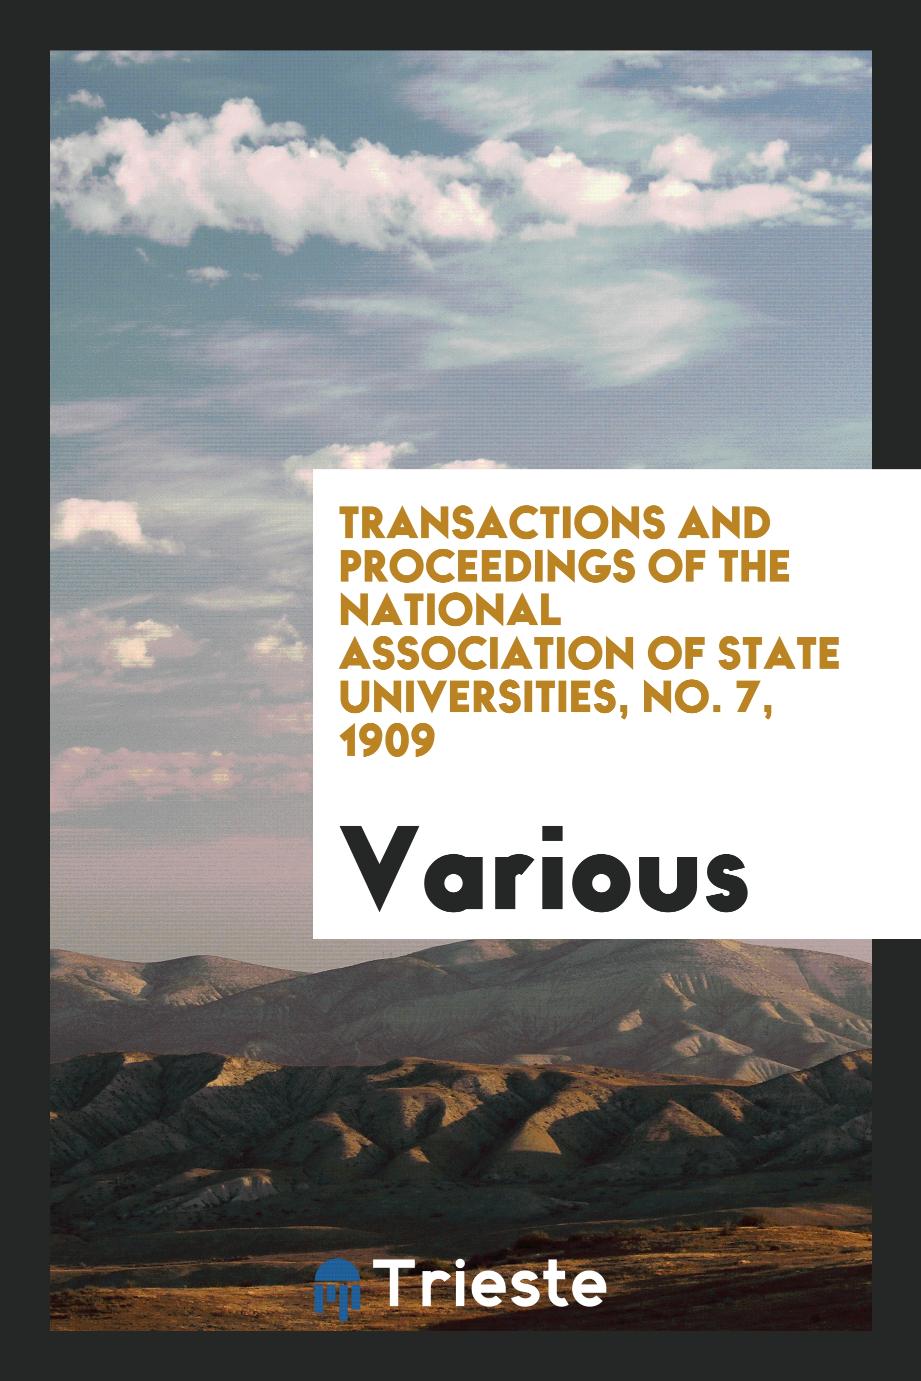 Transactions and proceedings of the National Association of State Universities, No. 7, 1909